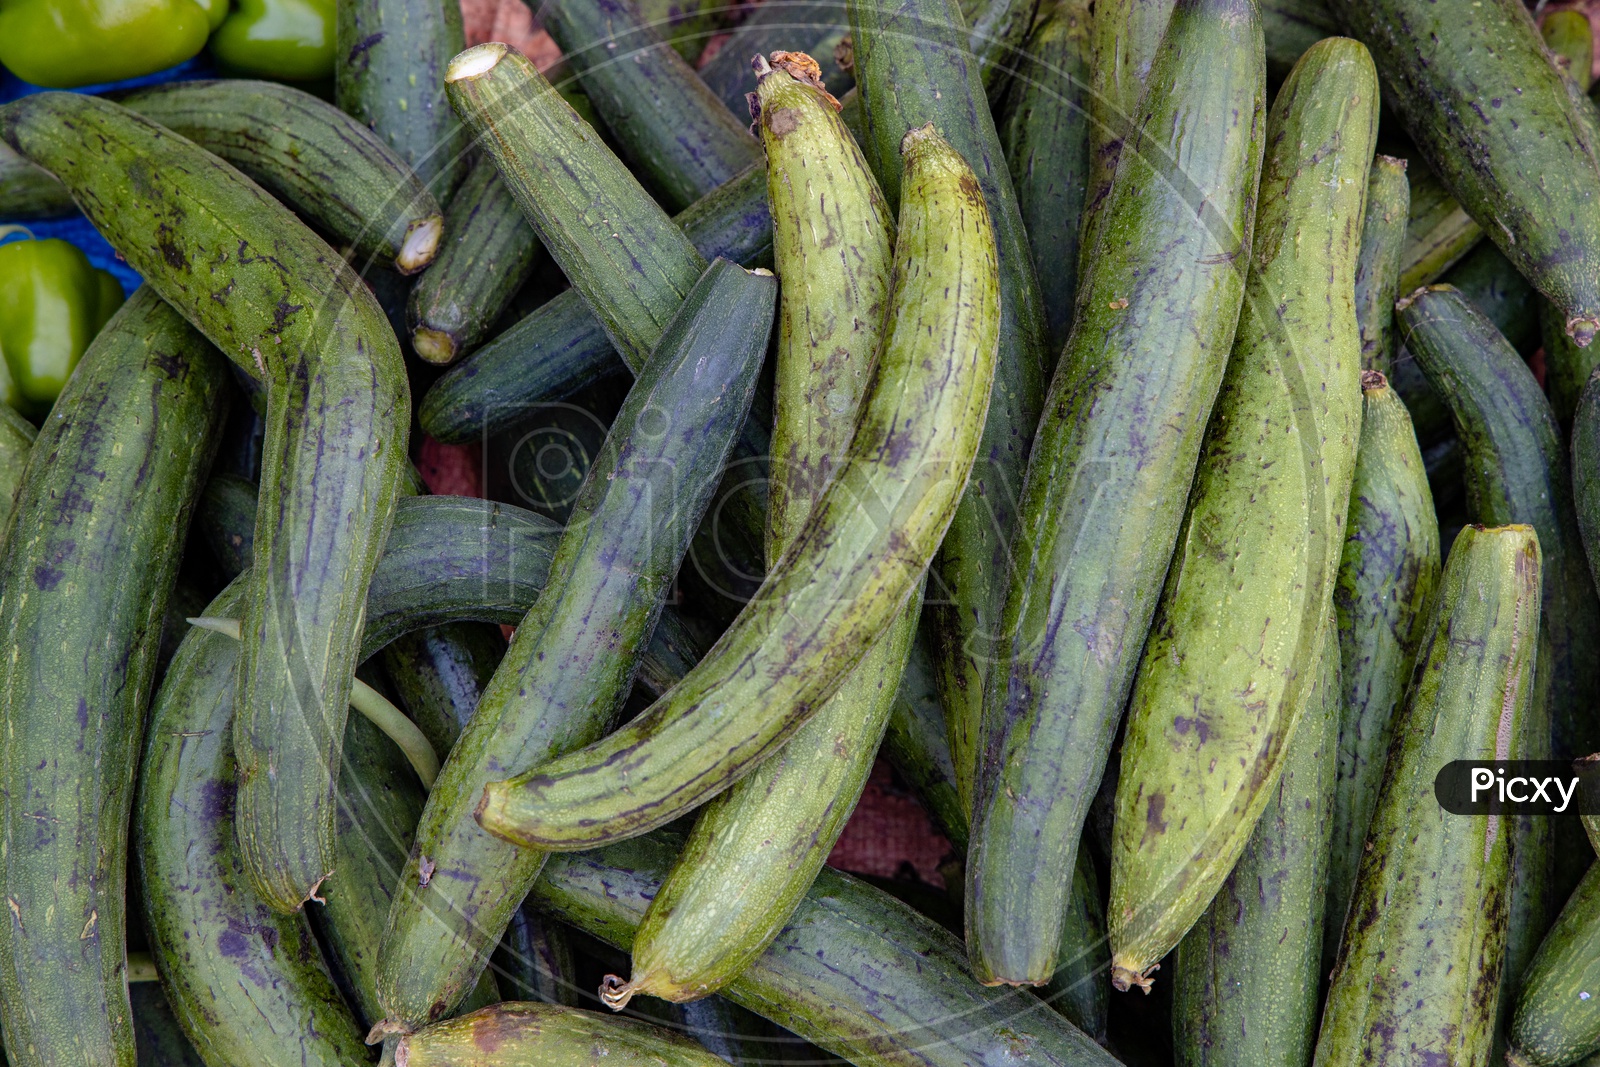 Keera   Cucumber  In a Vegetable Vendor Stall